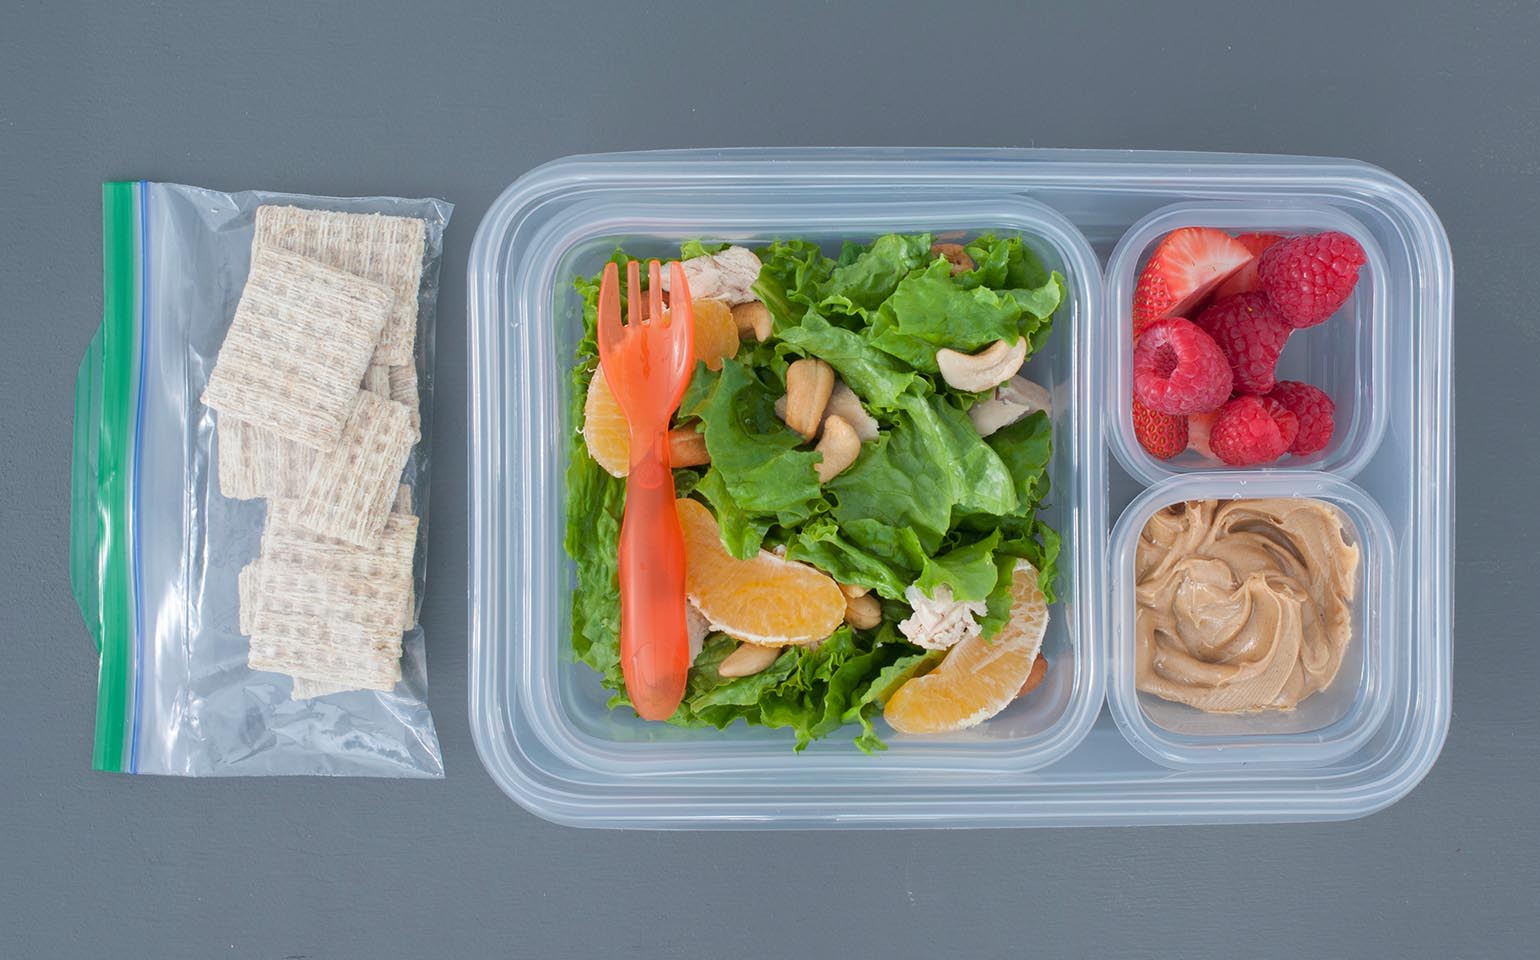 One Week of Lunches You Can Make in 1 Hour